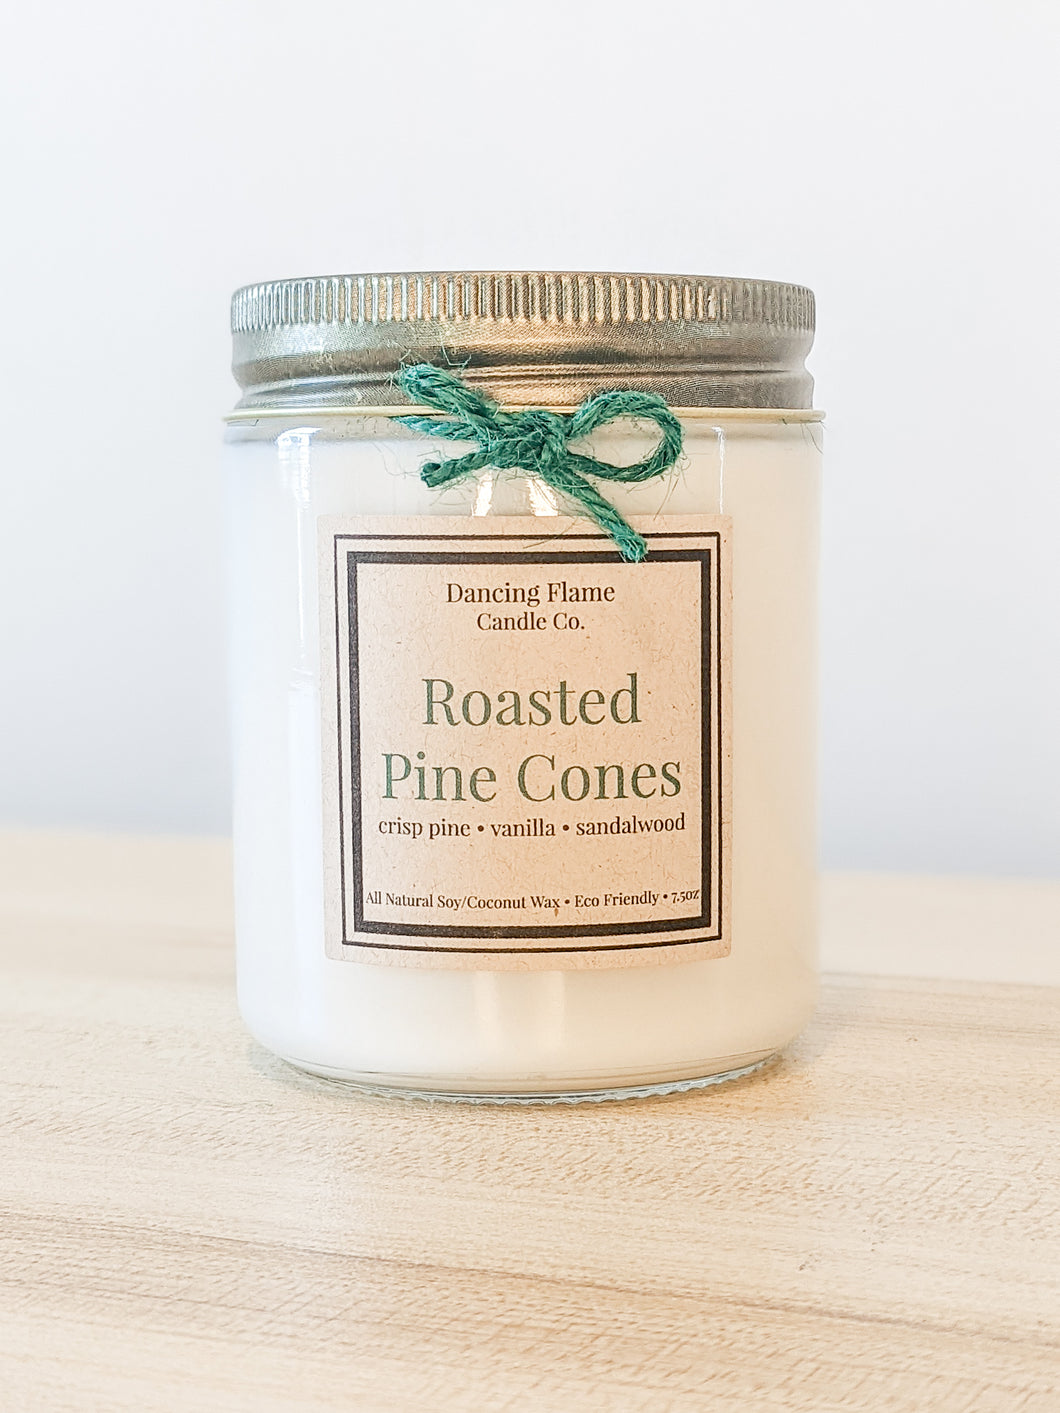 Roasted Pine Cones Soy & Coconut Wax Candle